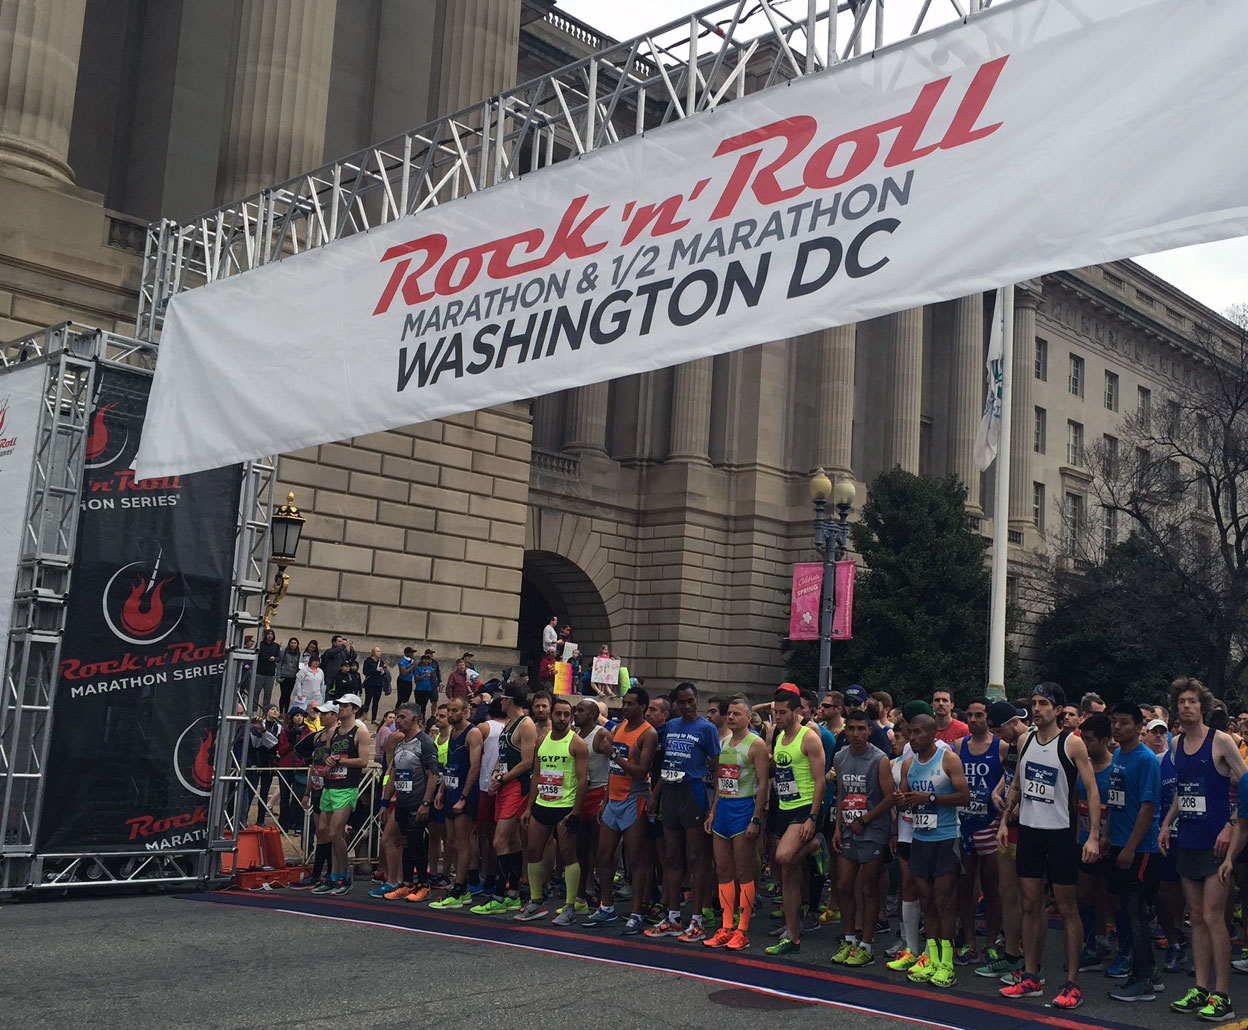 Racers get ready before the start of the Rock ‘n’ Roll Marathon. (WTOP/Dennis Foley)